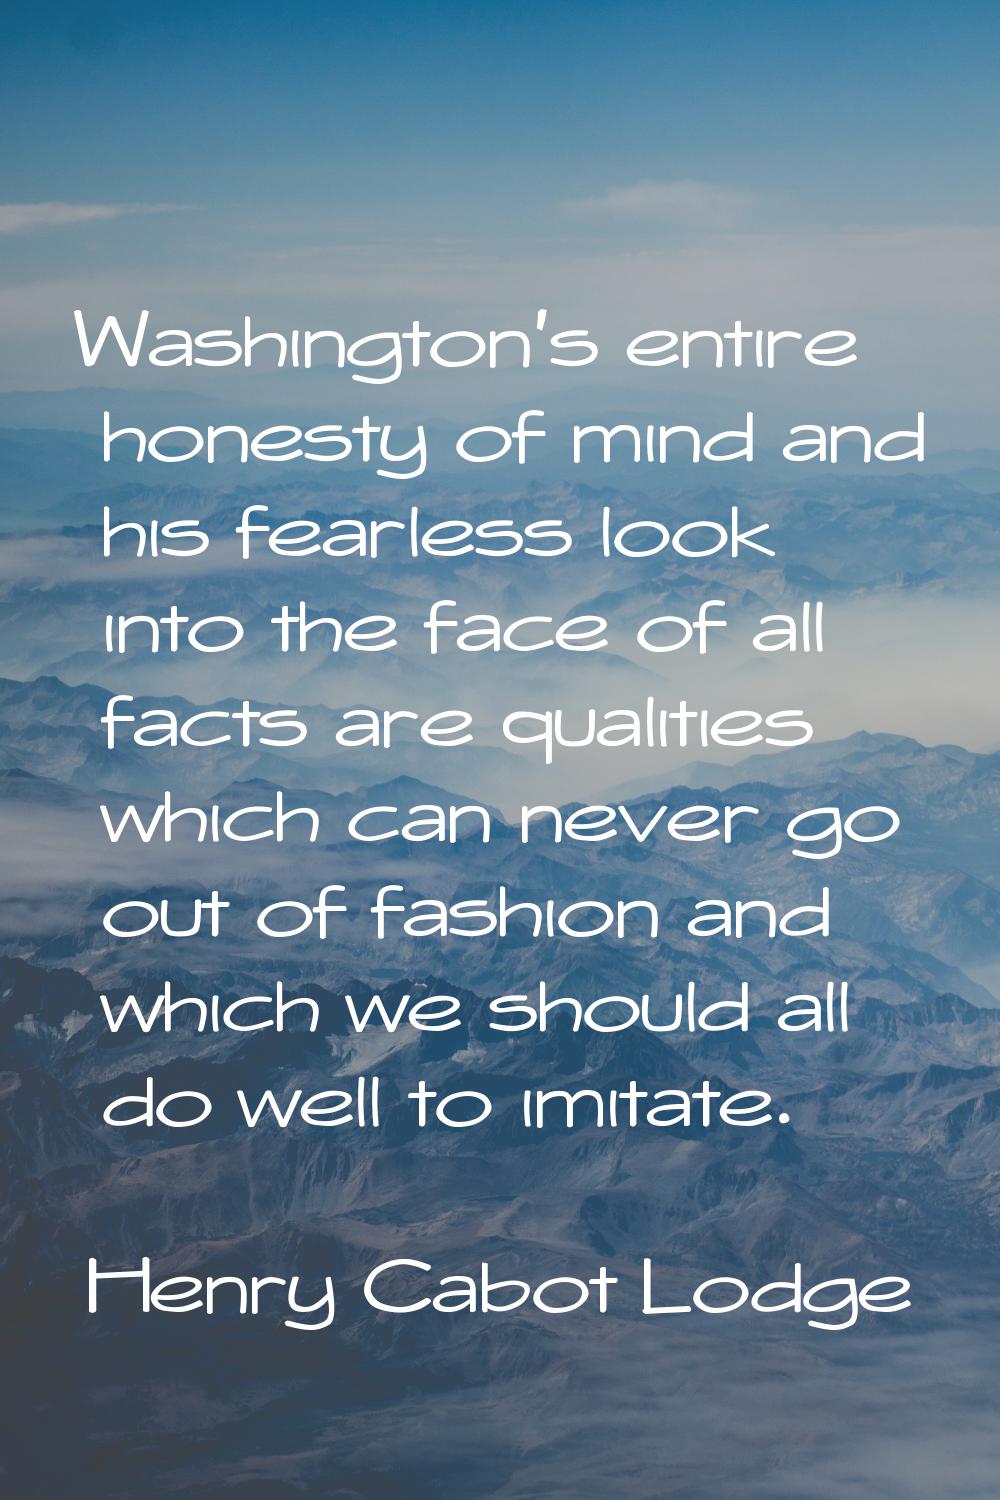 Washington's entire honesty of mind and his fearless look into the face of all facts are qualities 